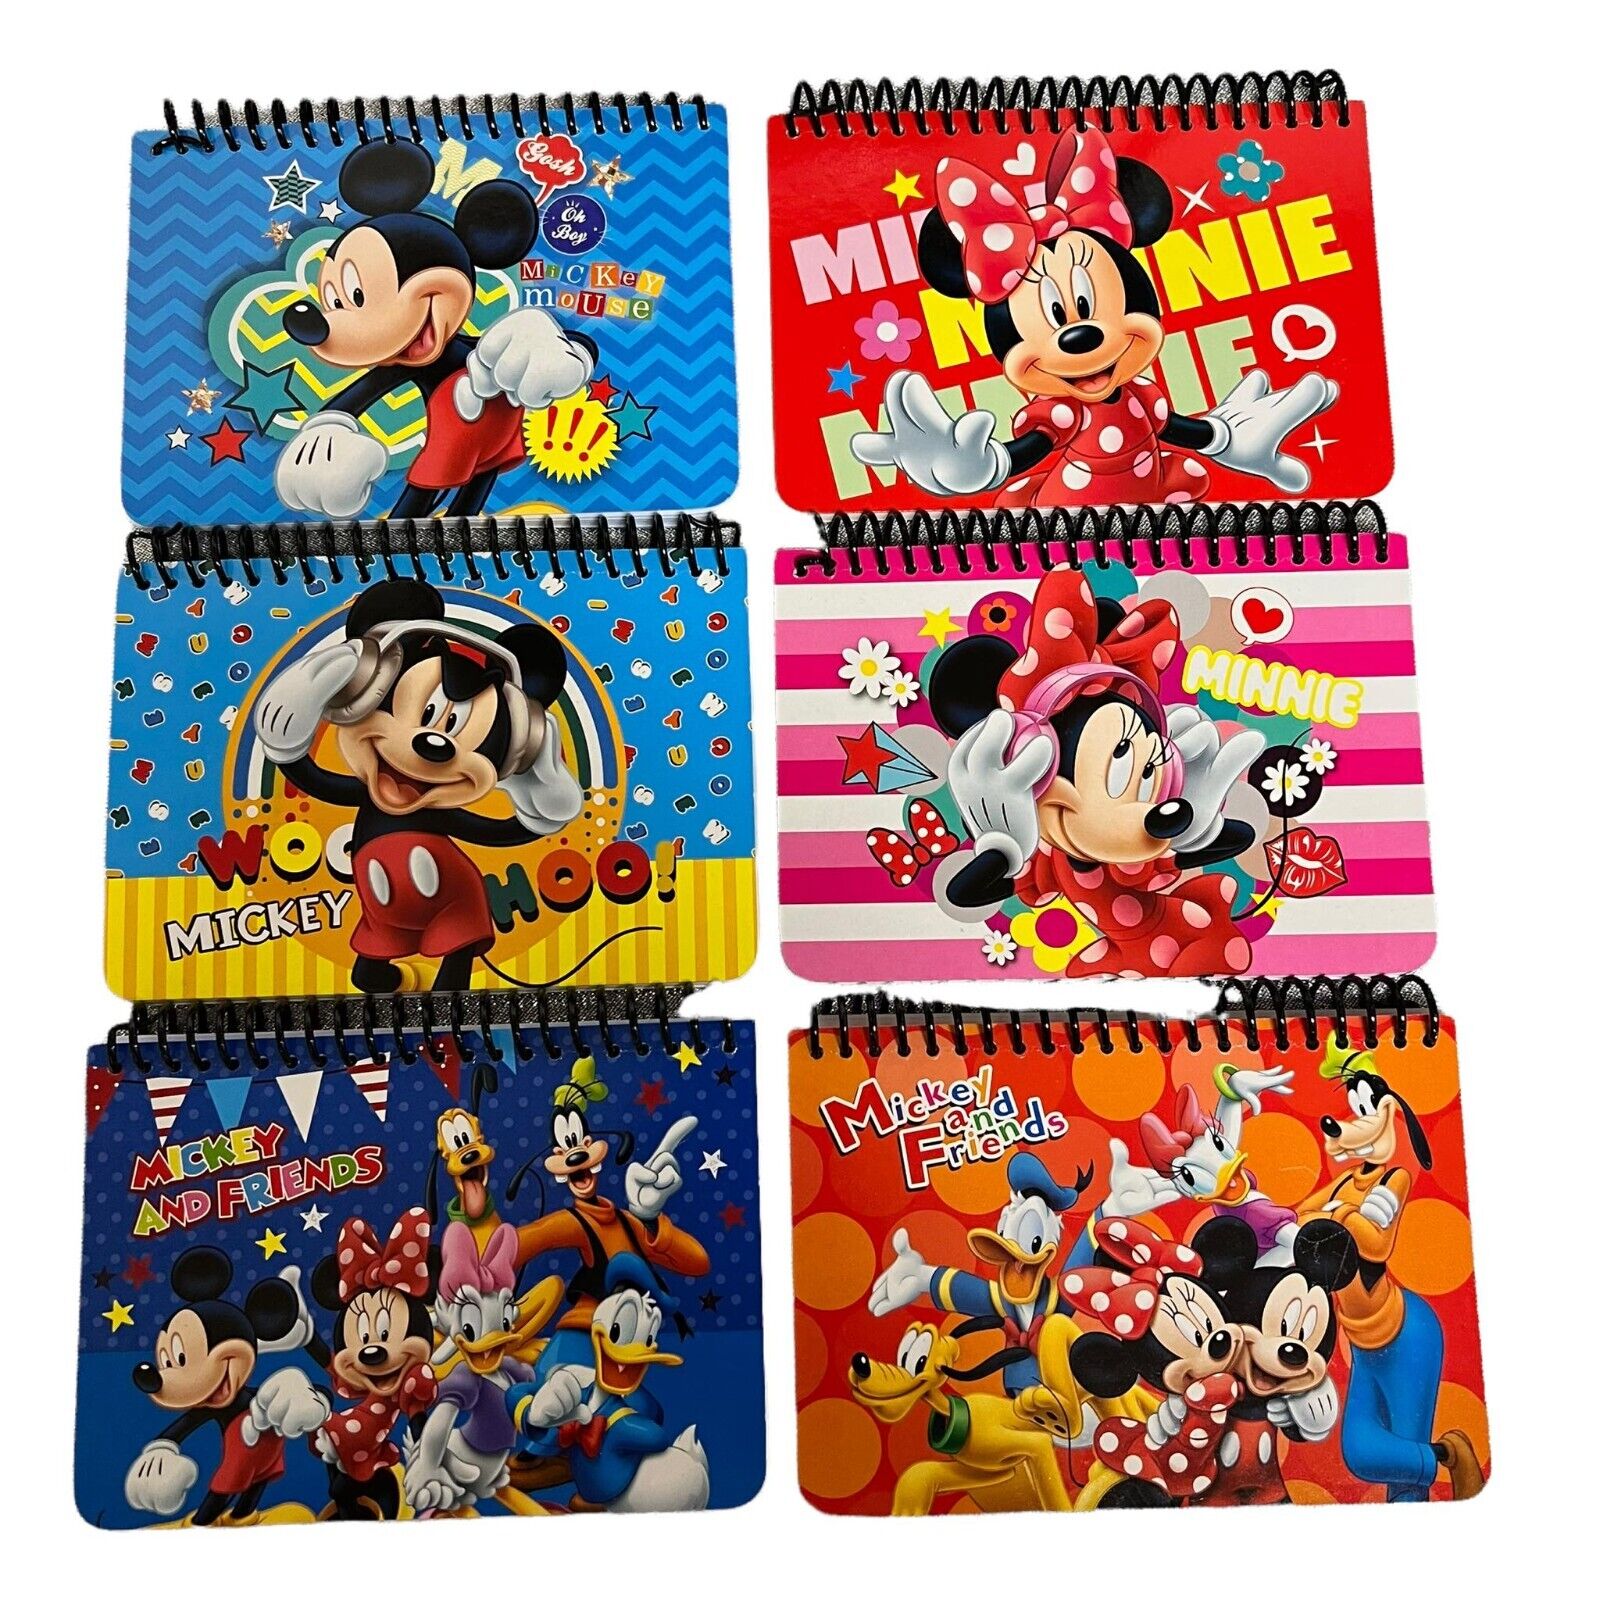 Set of 6 Disney MICKEY MOUSE AND Friends autograph book